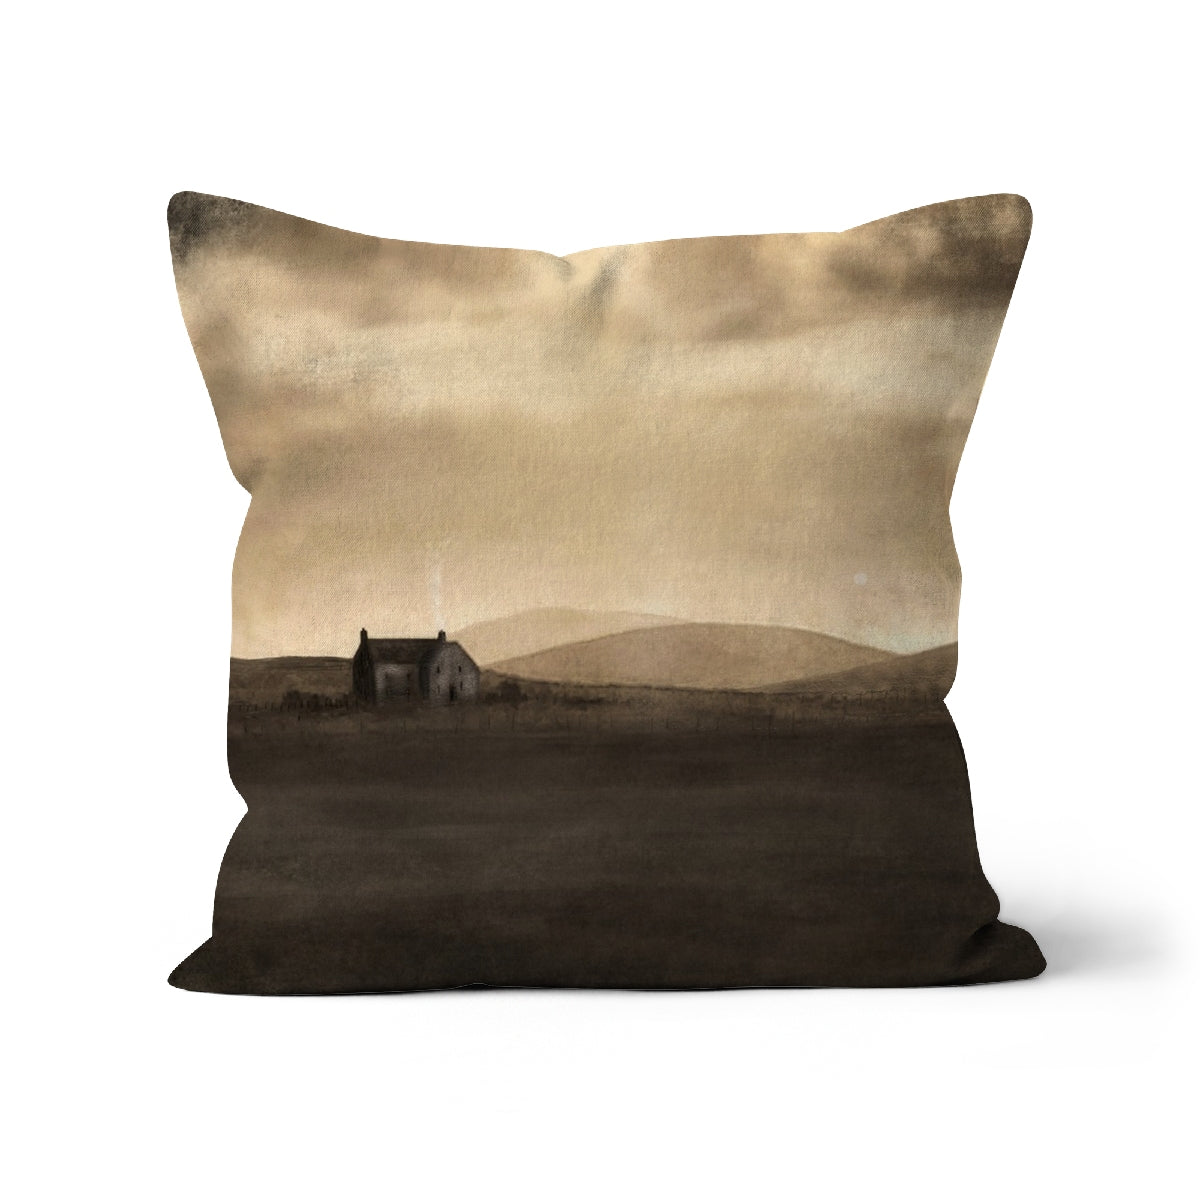 A Moonlit Croft Art Gifts Cushion-Cushions-Hebridean Islands Art Gallery-Canvas-22"x22"-Paintings, Prints, Homeware, Art Gifts From Scotland By Scottish Artist Kevin Hunter